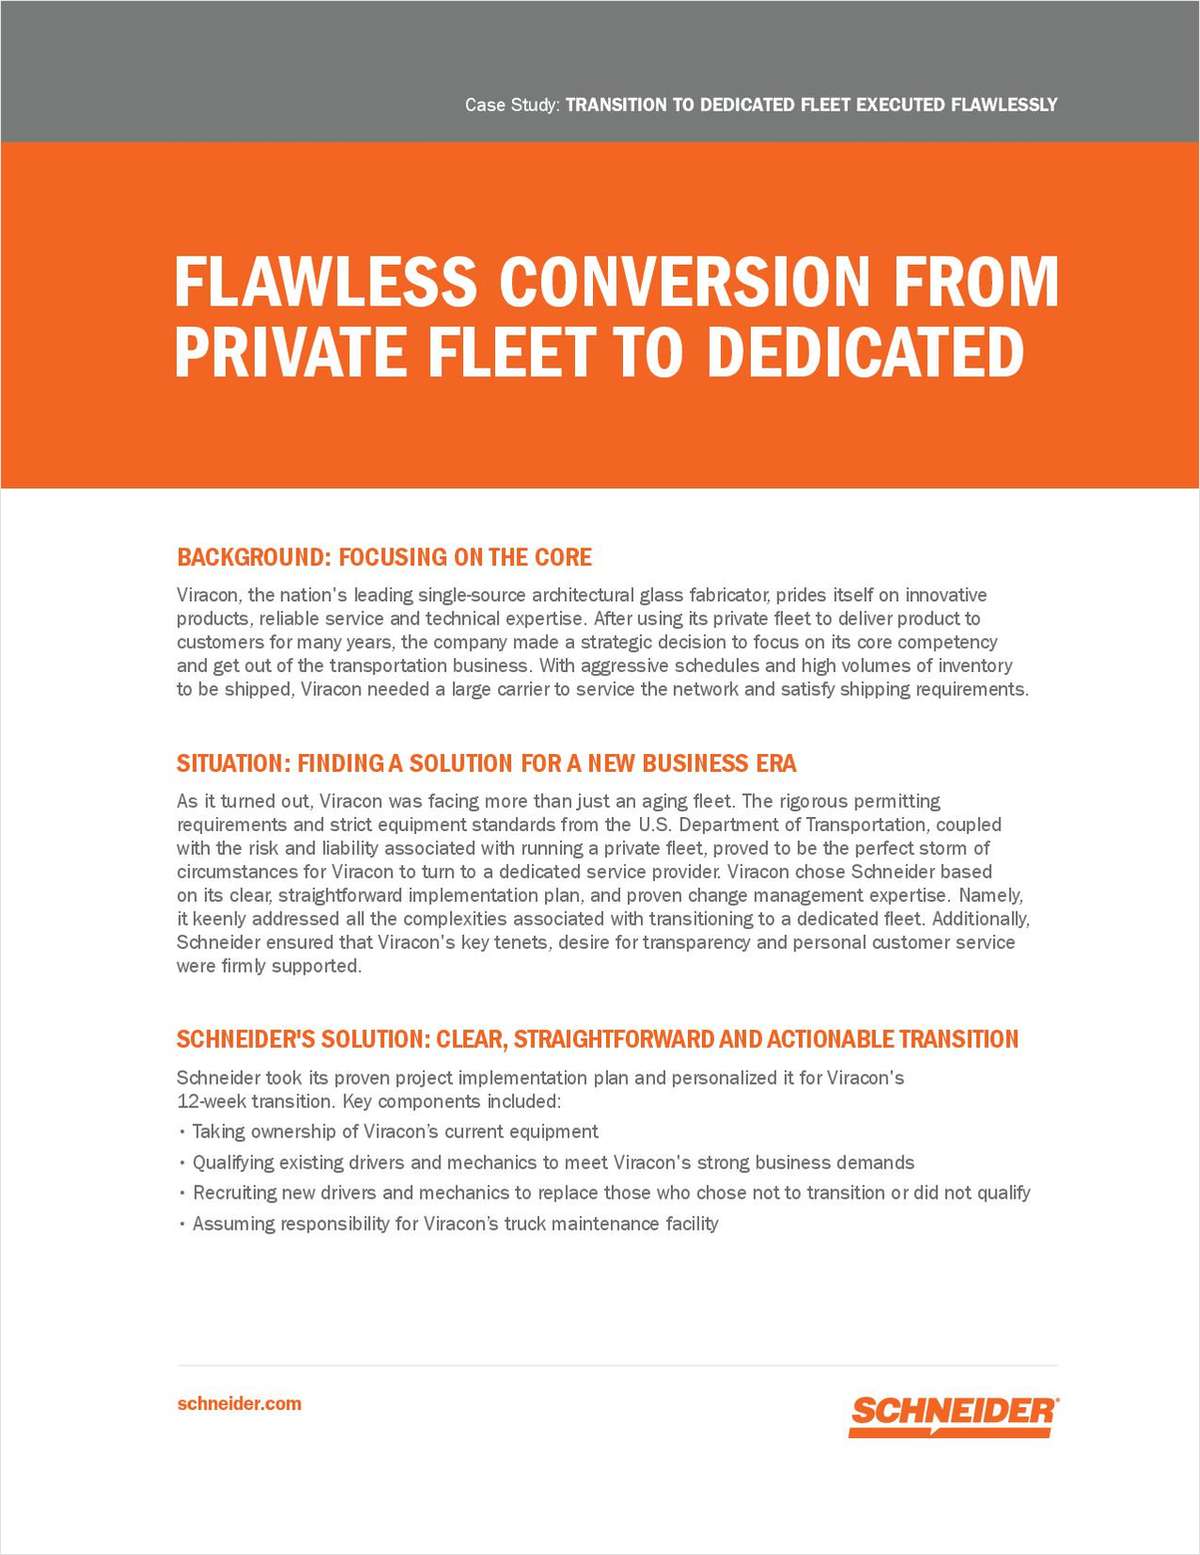 Flawless Conversion from Flatbed Private Fleet to Dedicated